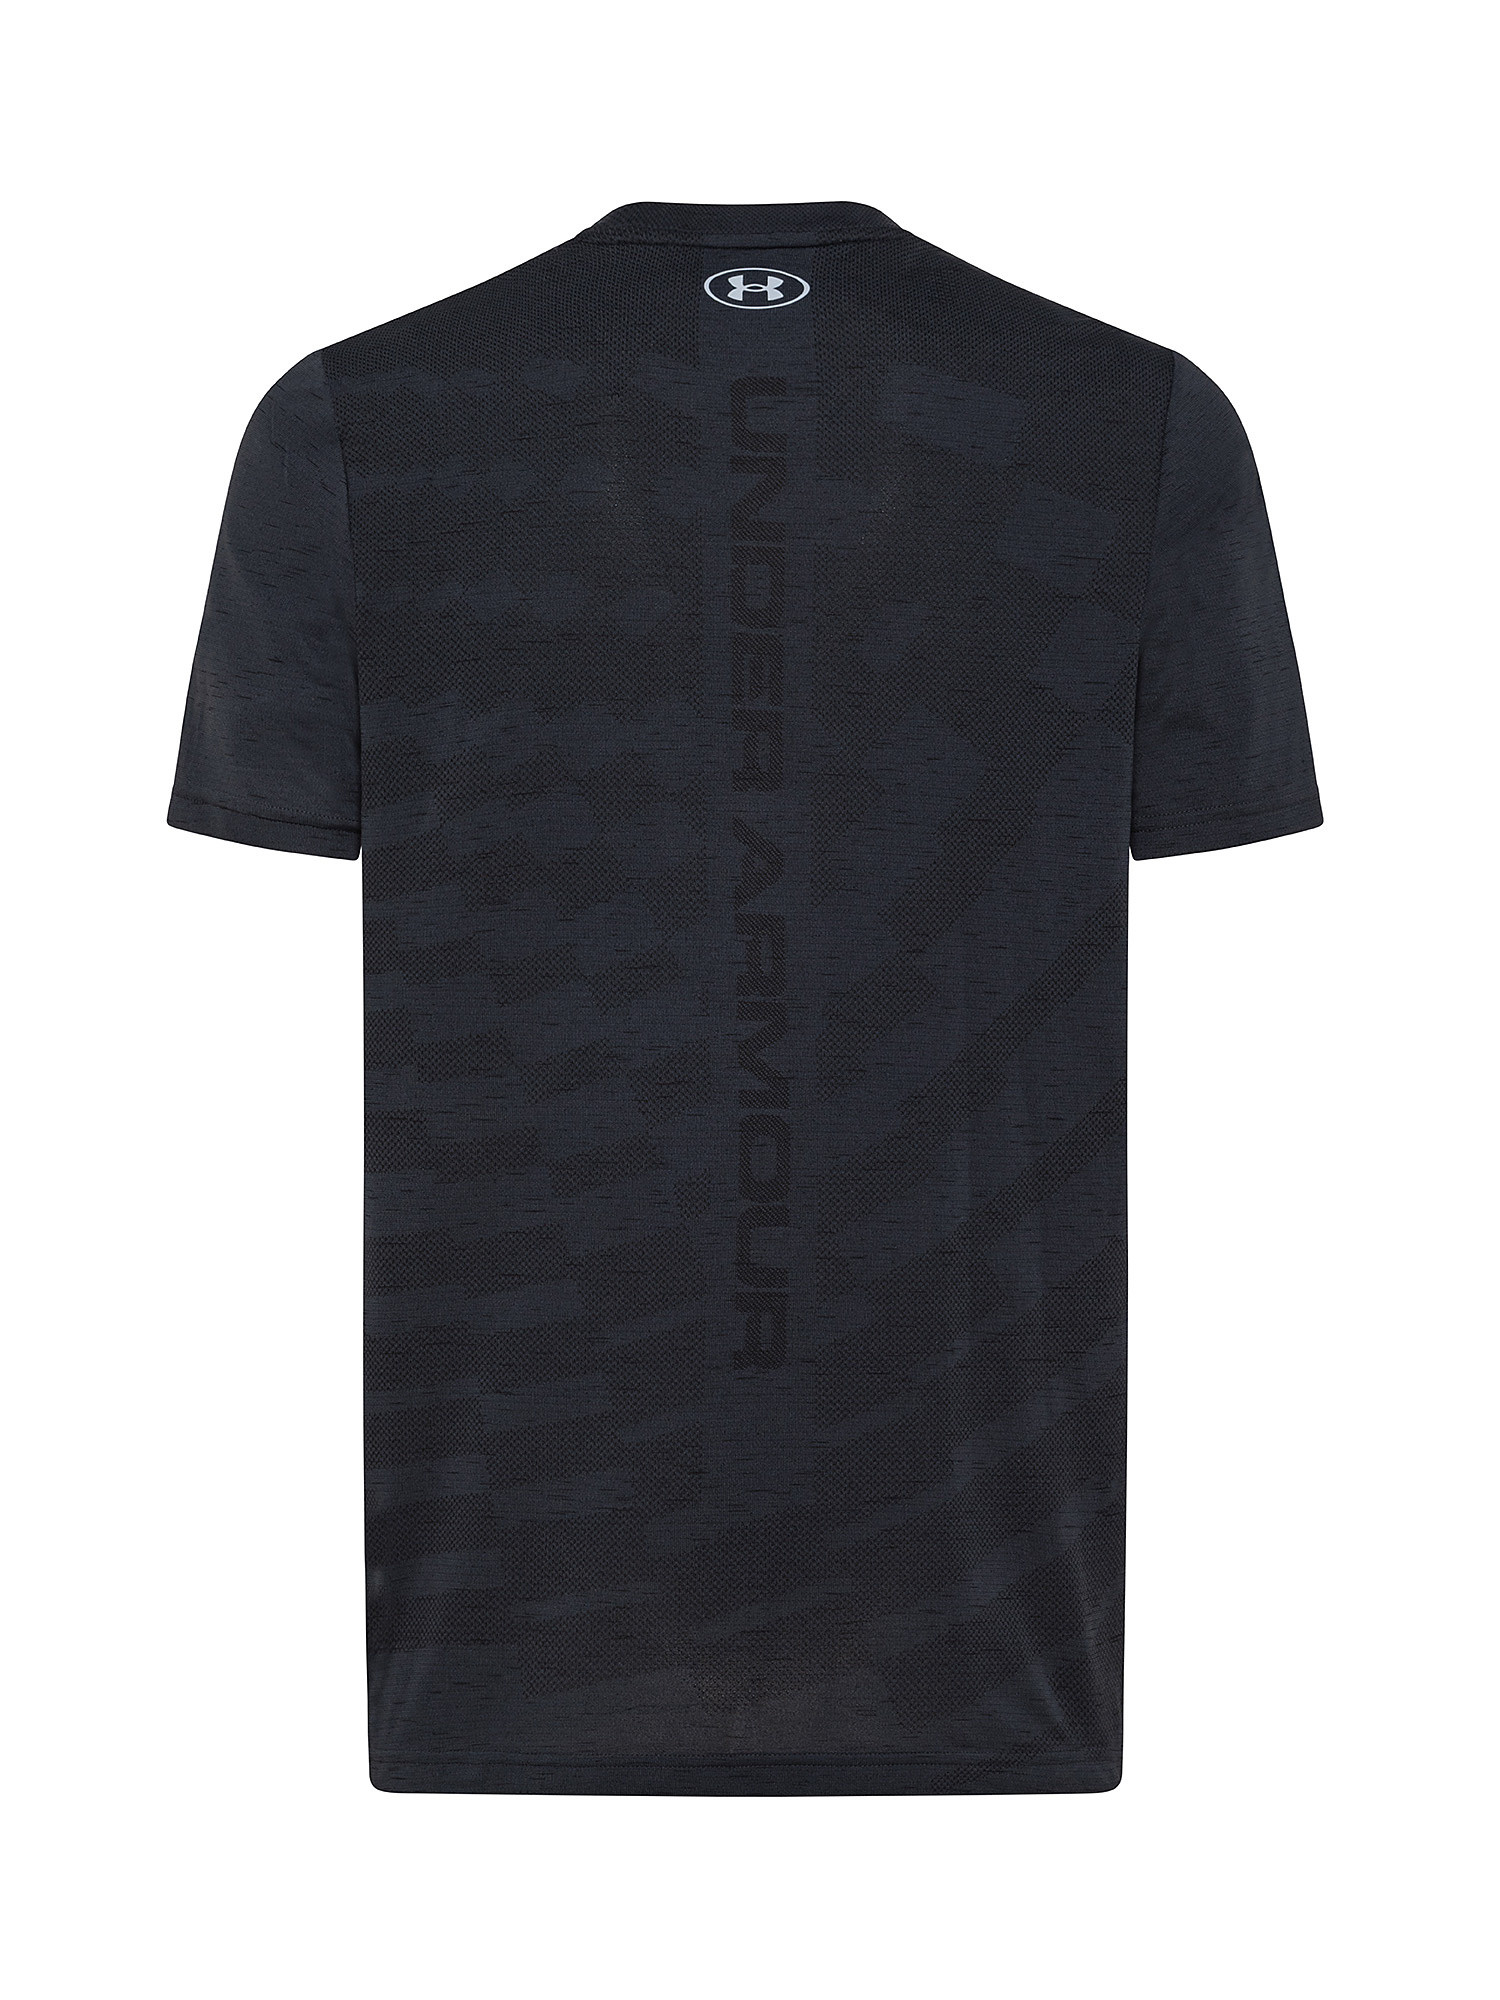 Soft knit fabric T-shirt with technical mesh panels, Black, large image number 1